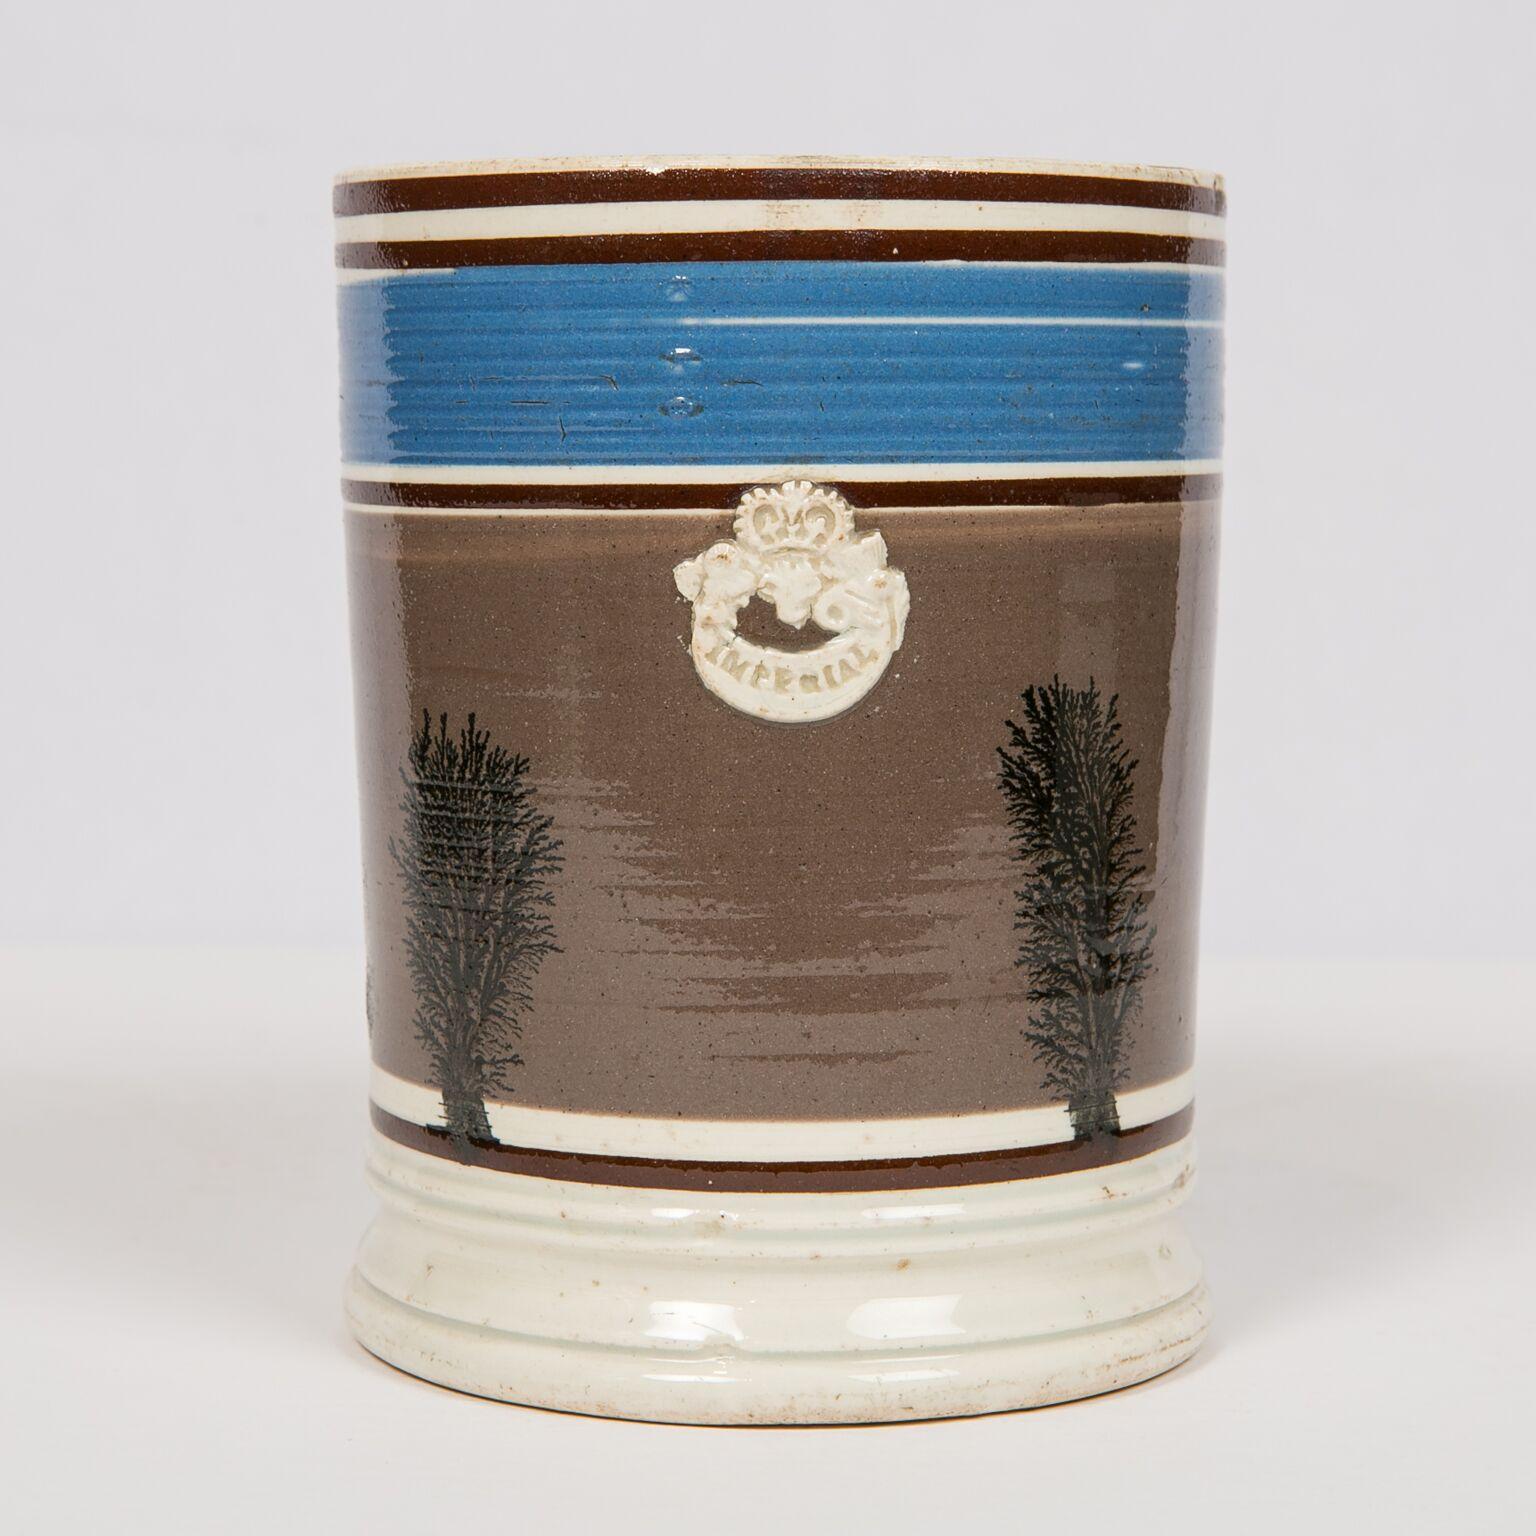 T.his is an Imperial Quart mocha ware mug. The mug was made in England in a style that was popular on the European Continent. It has rouletted bands covered in a blue slip and a large field of gray-brown slip that is decorated with 